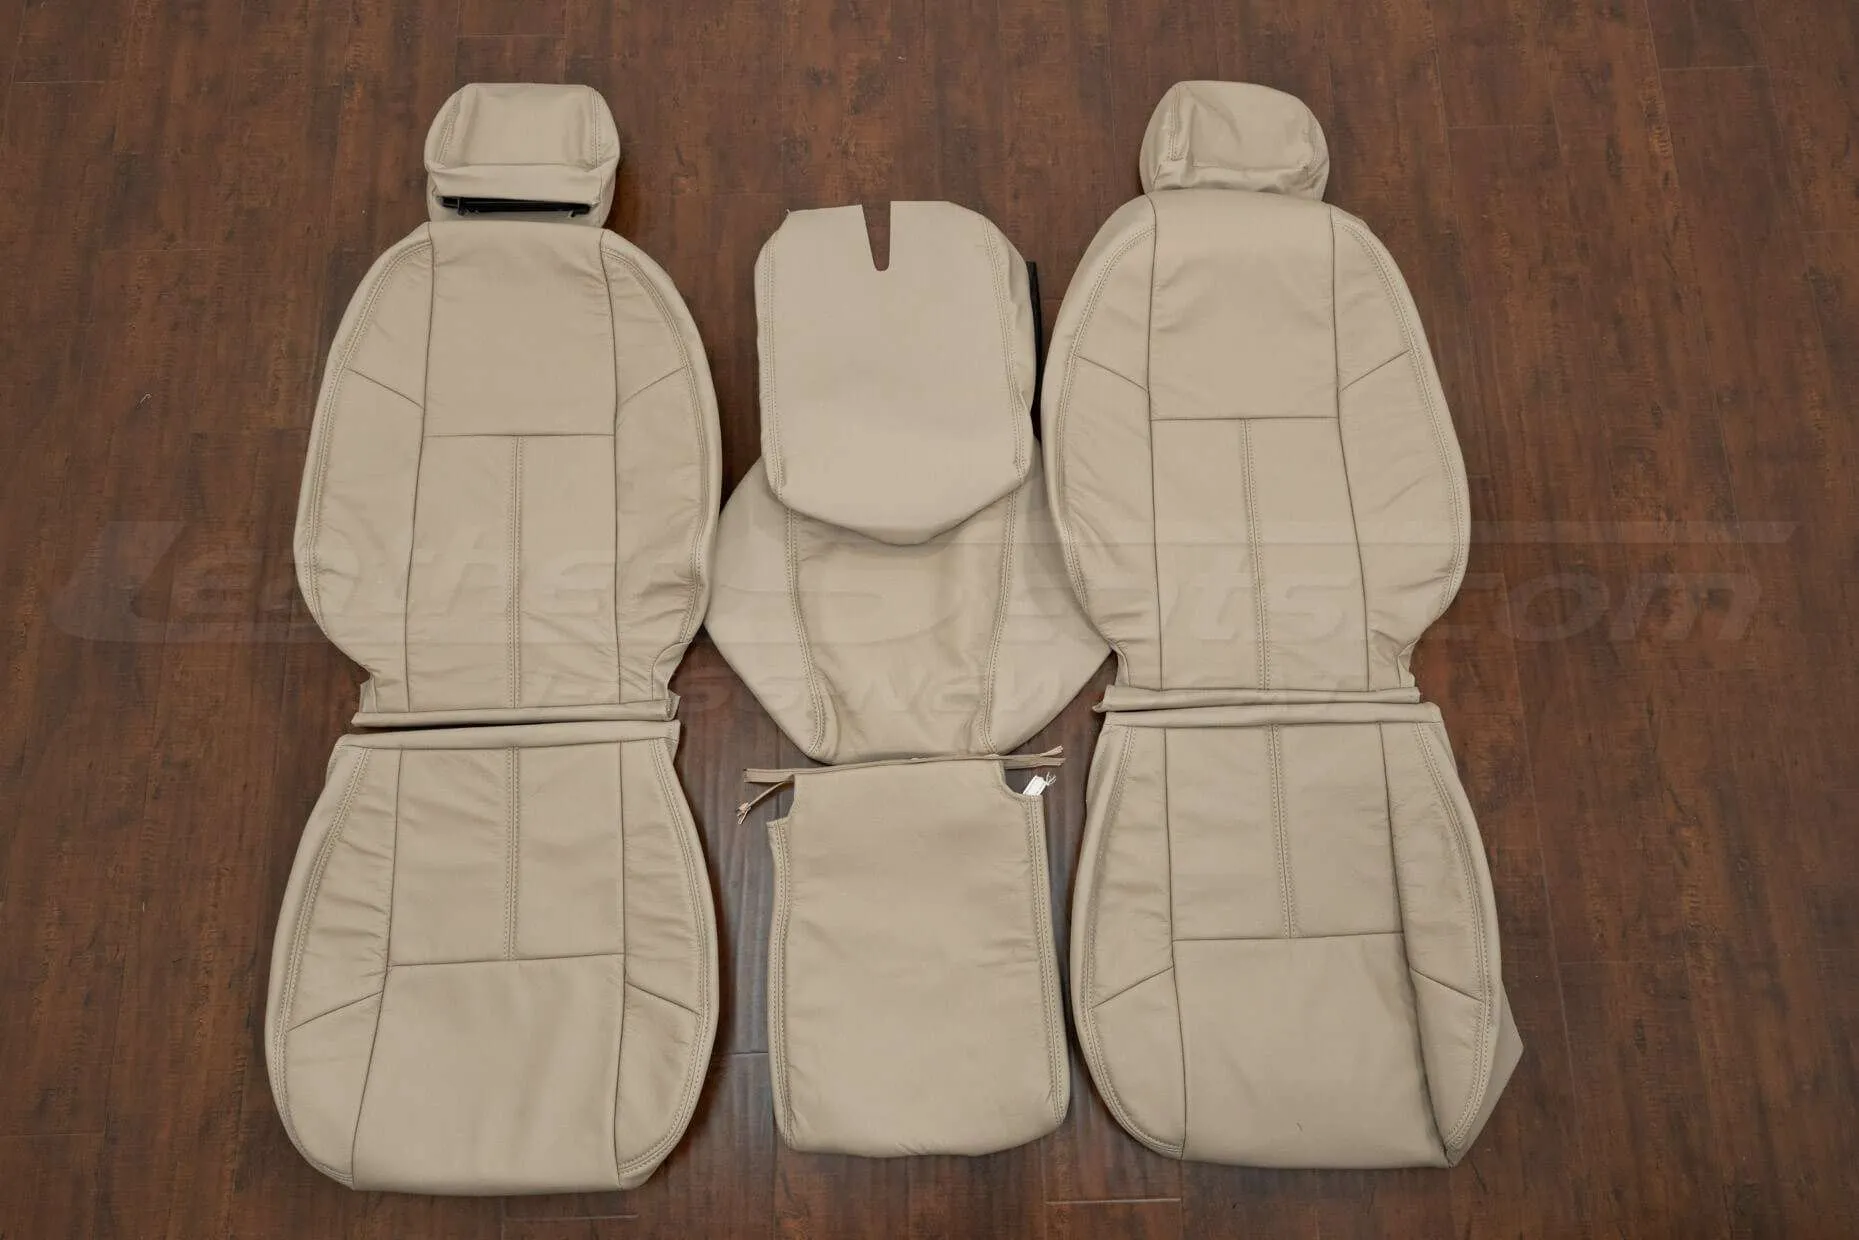 Chevrolet Silverado Leather Seat Kit - Sandstone Front seat upholstery 40/20/40